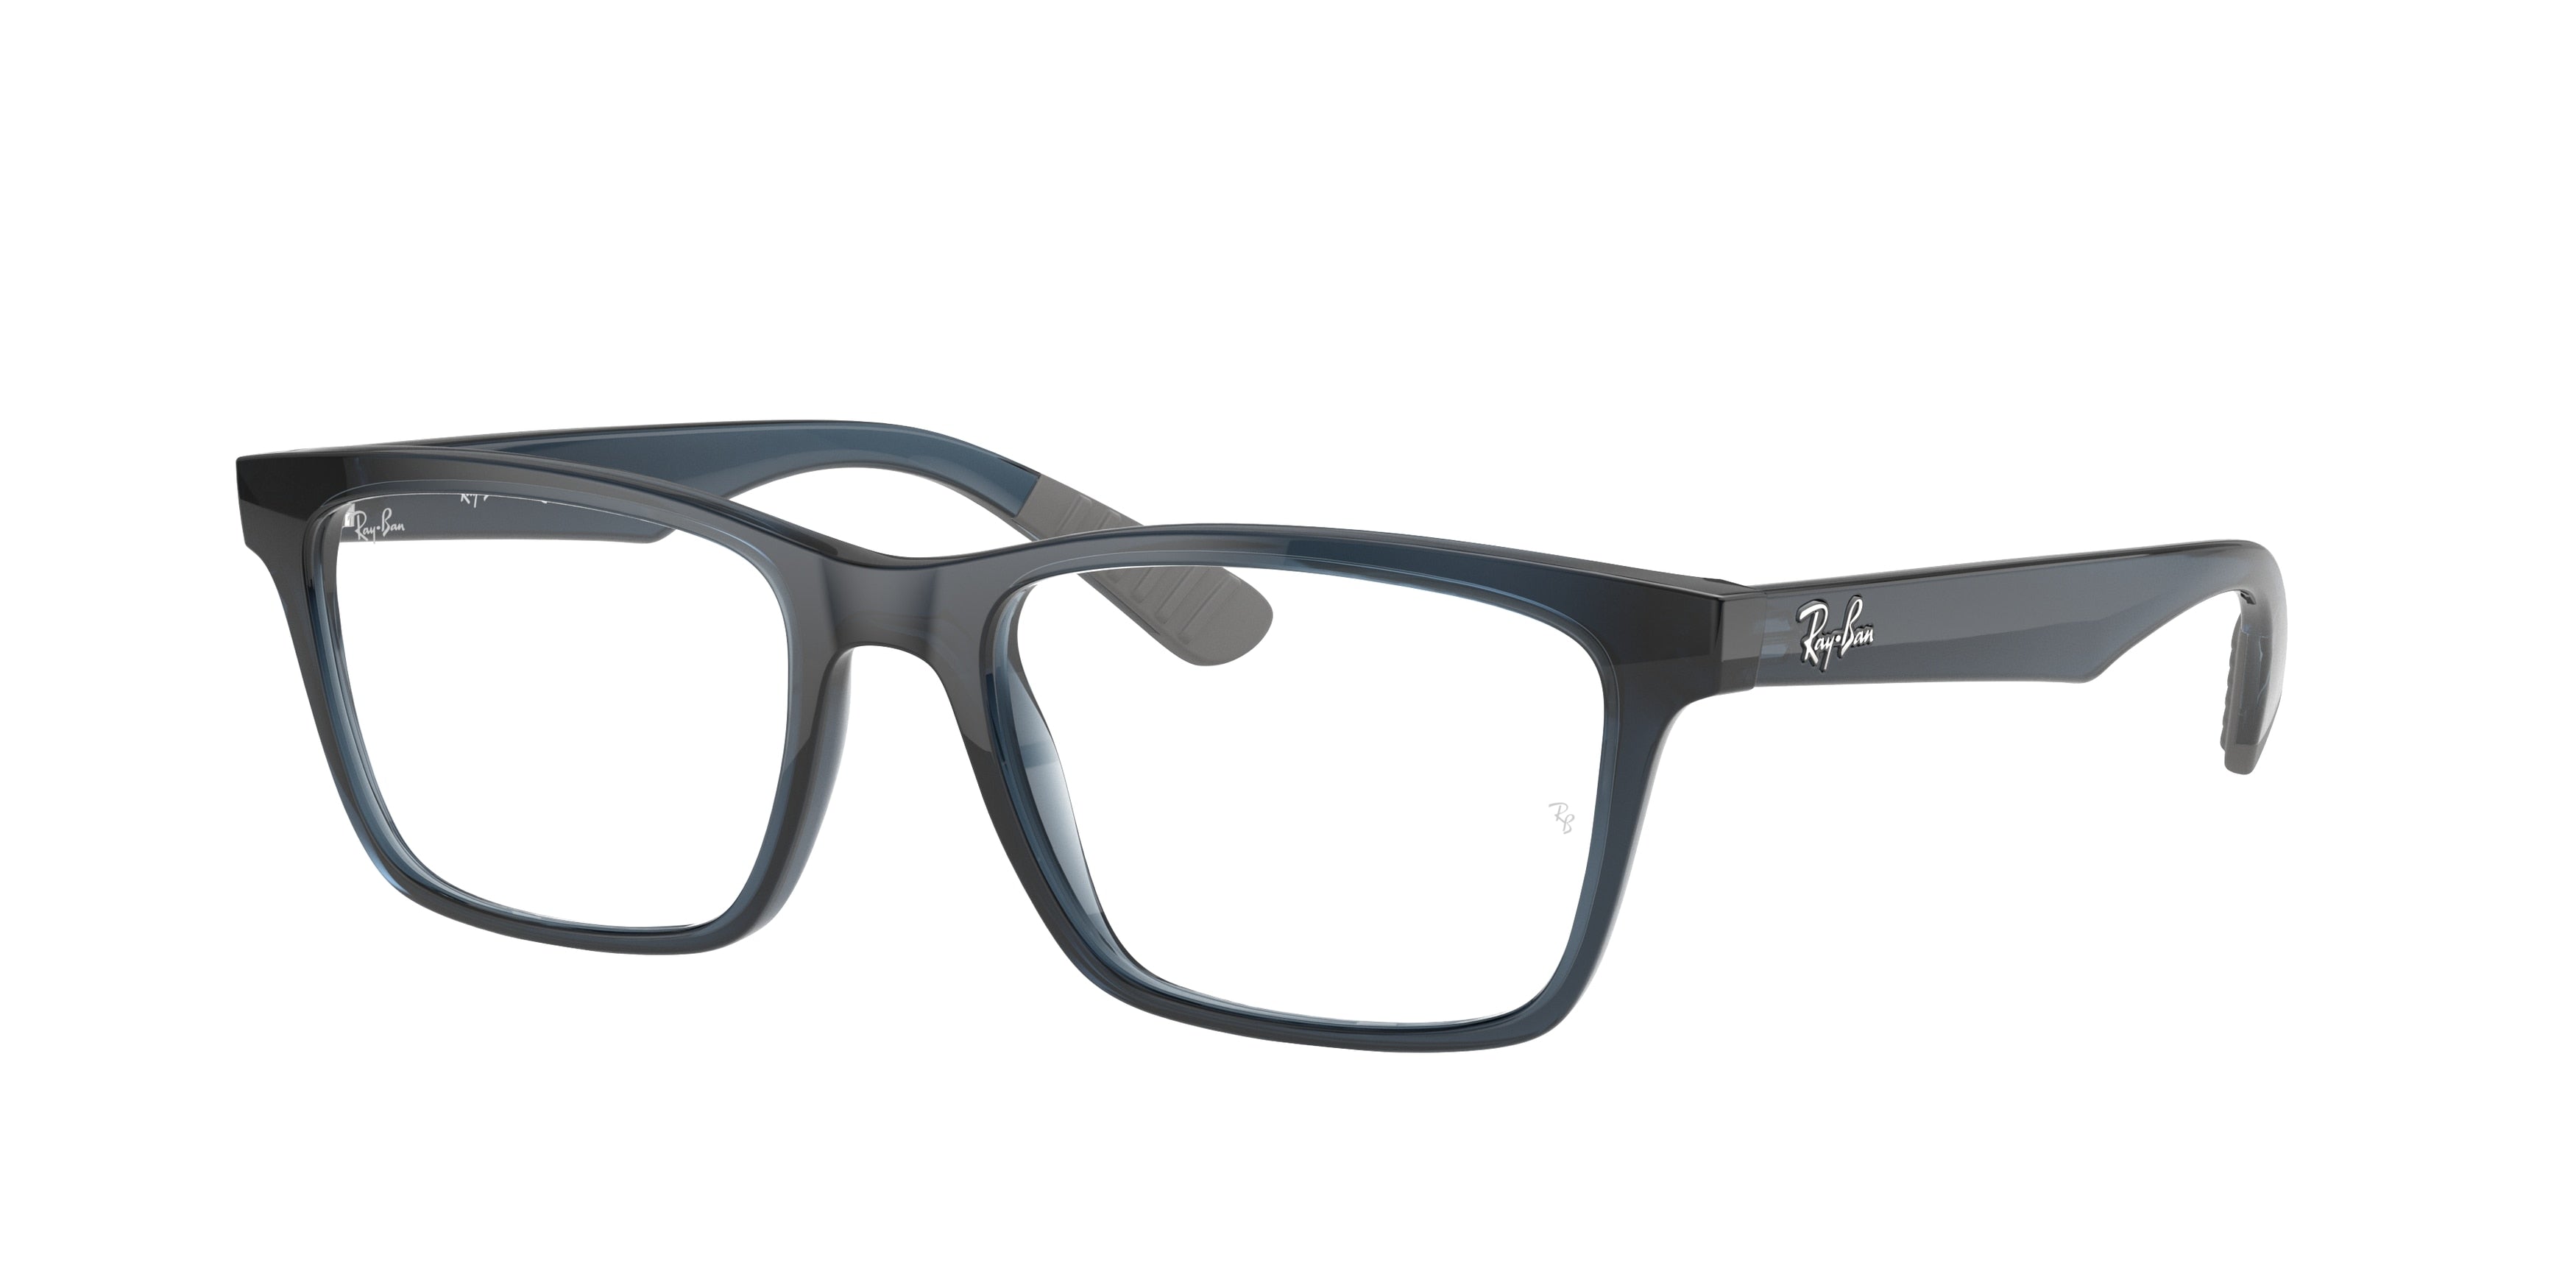 Ray-Ban Optical RX7025 Square Eyeglasses  5719-Blue 57-150-17 - Color Map Blue